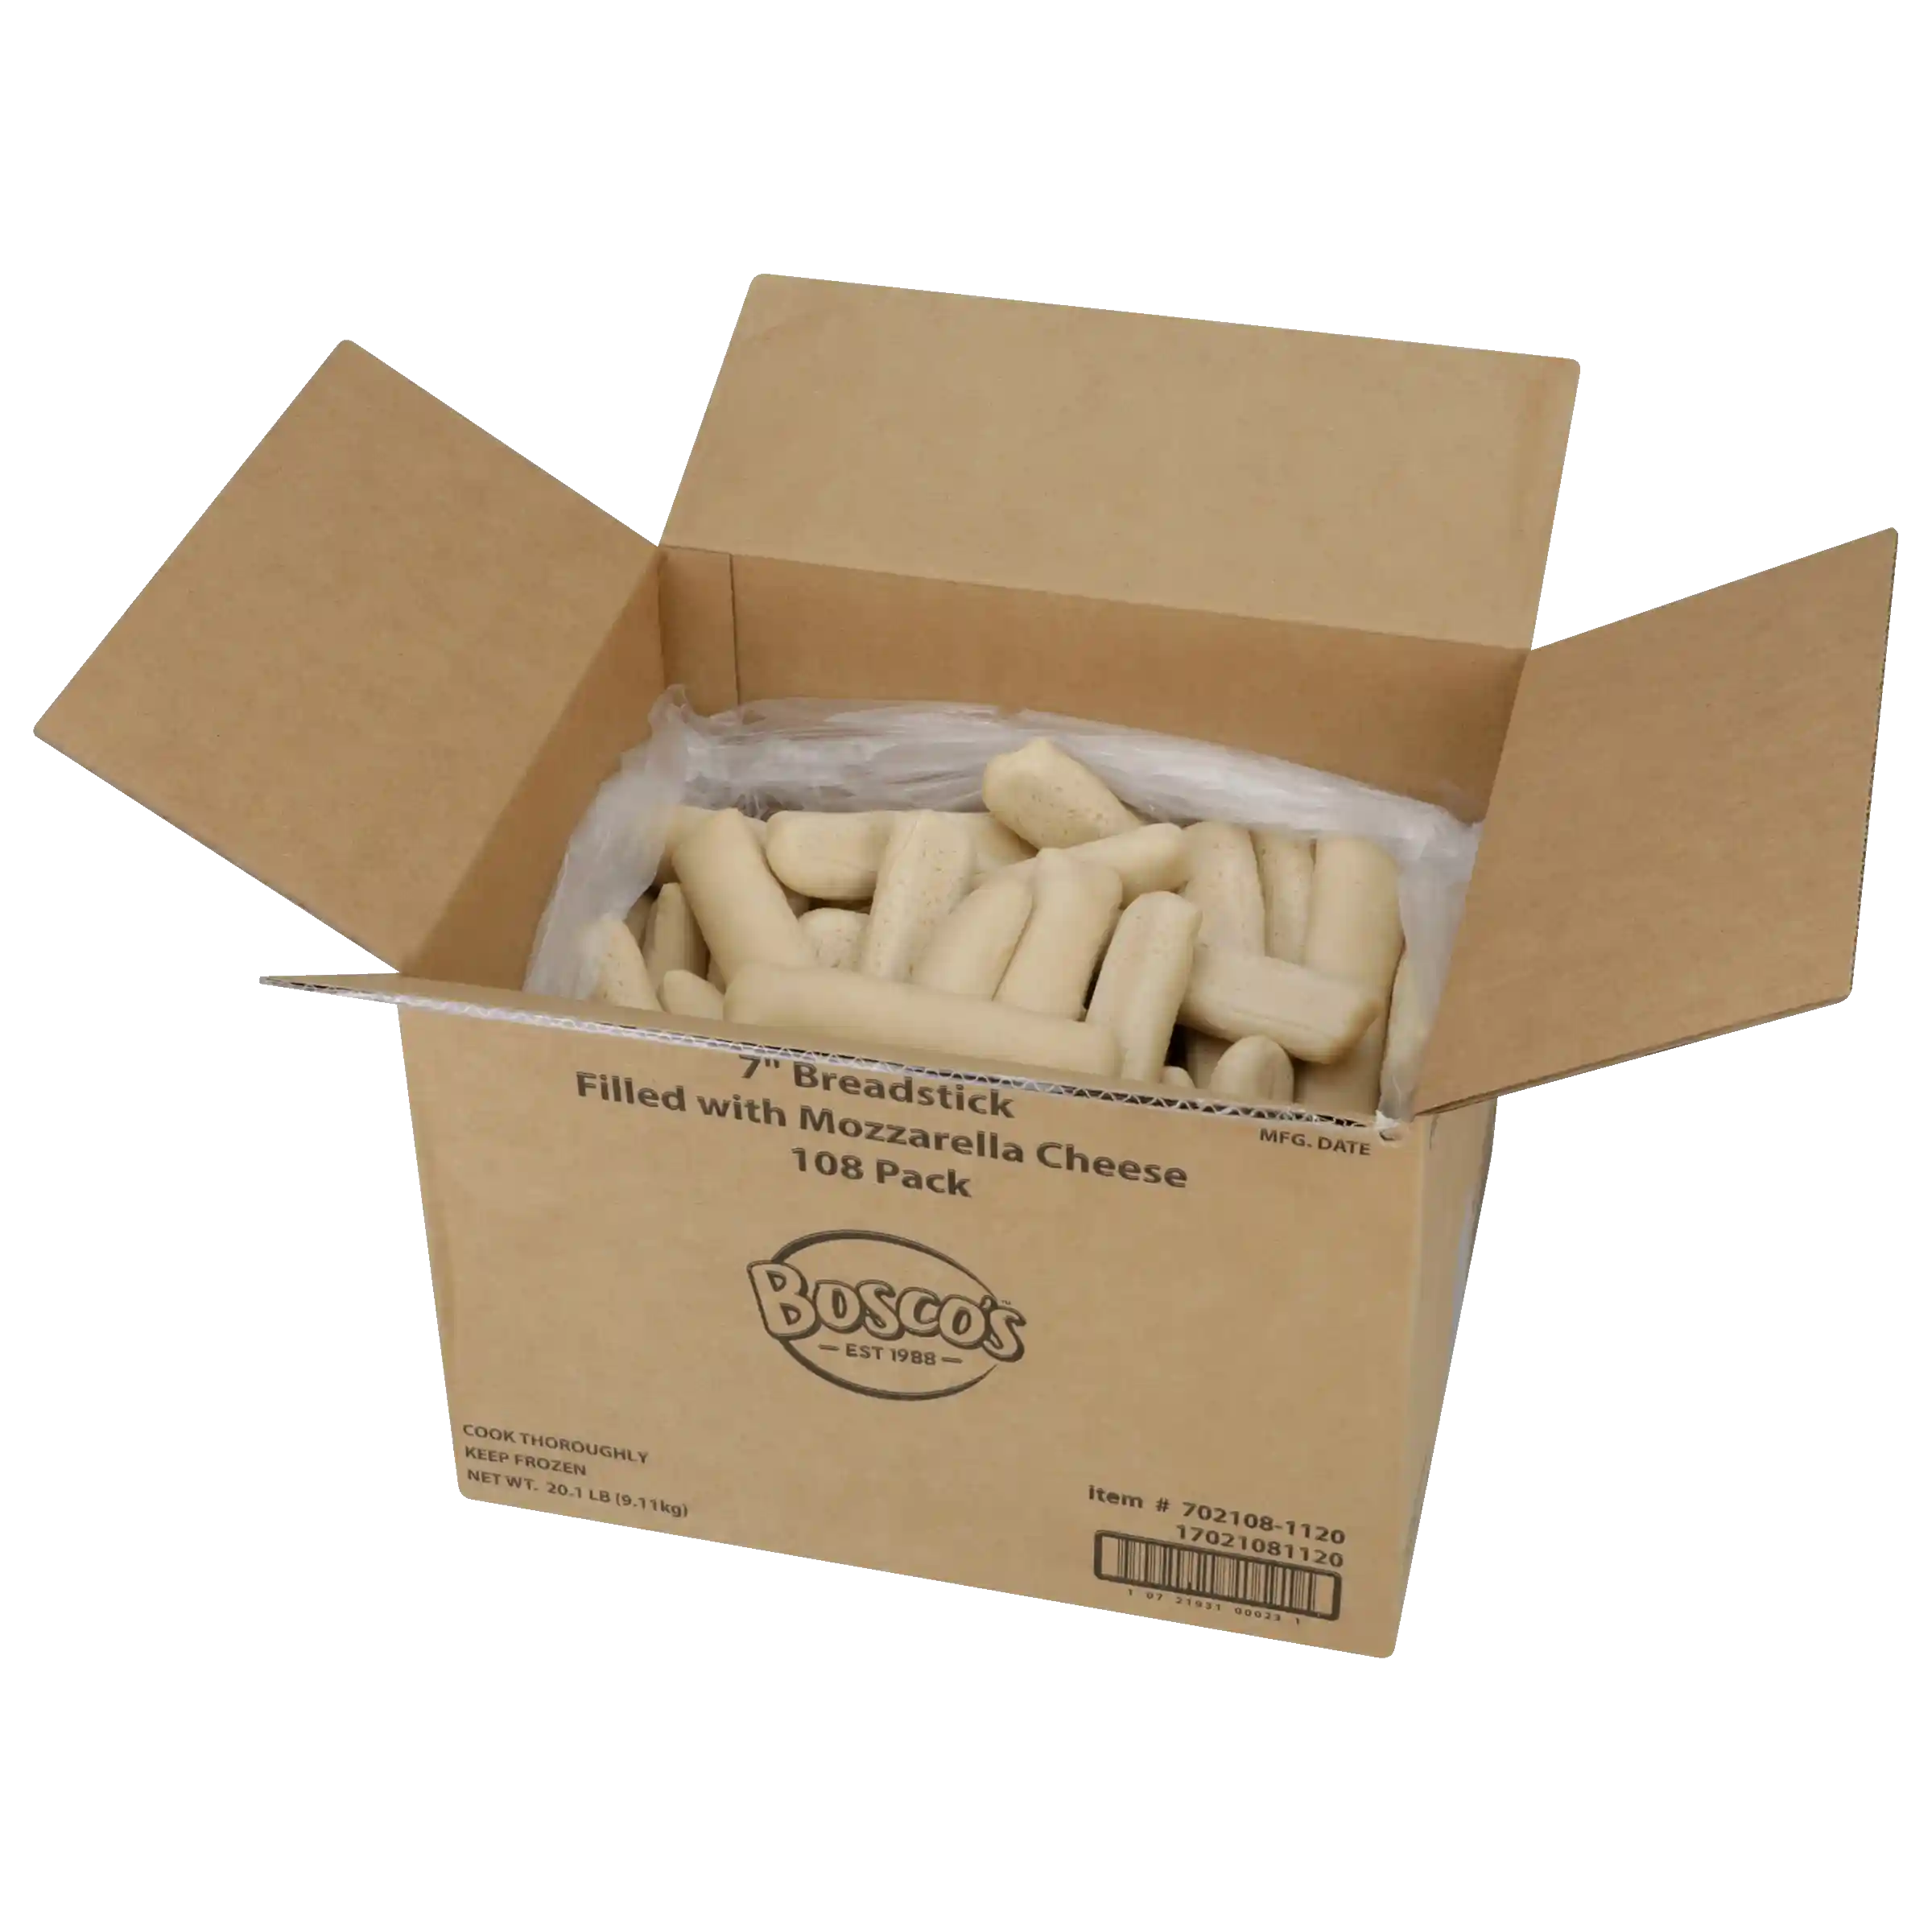 Bosco® 7" Breadstick Stuffed with Mozzarella Cheese, 2.99 oz. with Bags_image_31